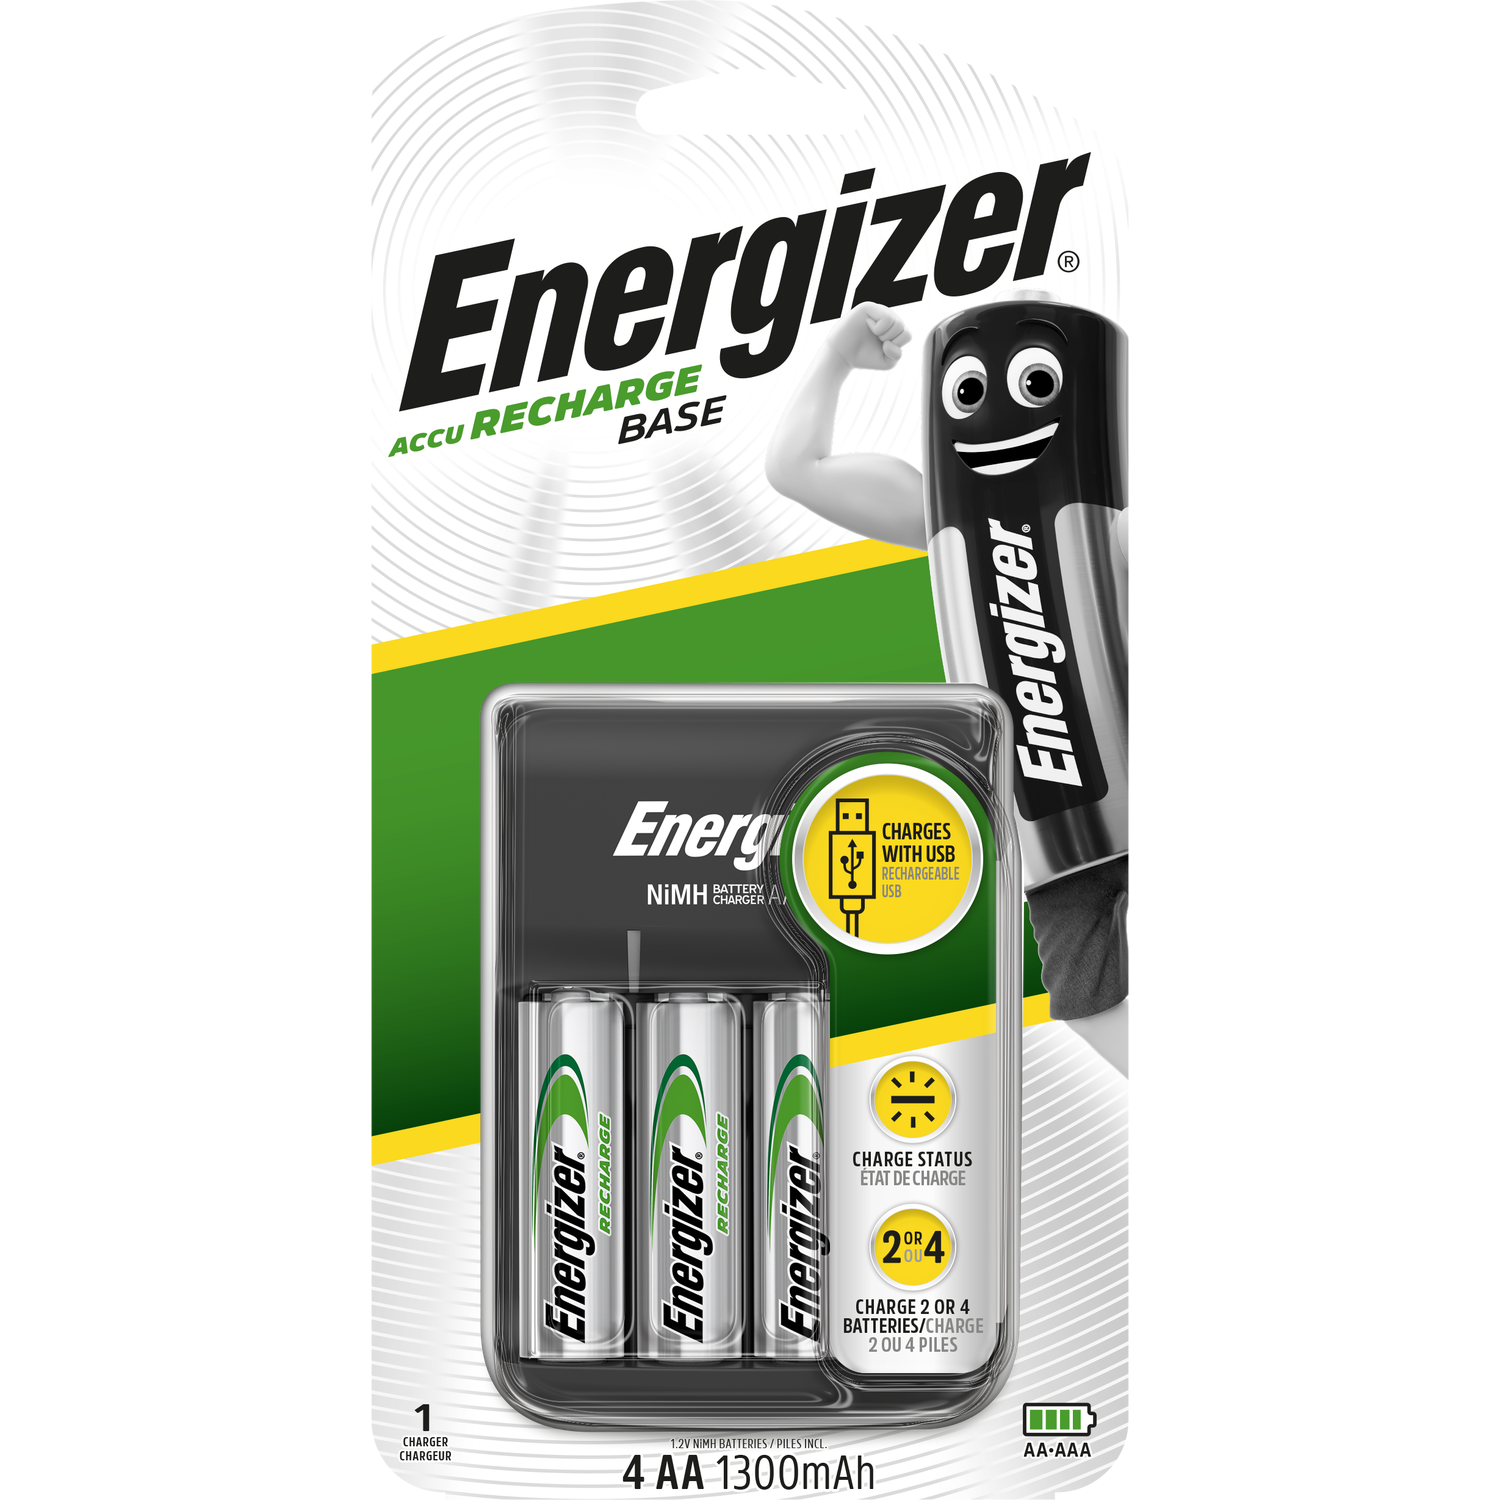 Energizer USB Charger with Precharged AA Image